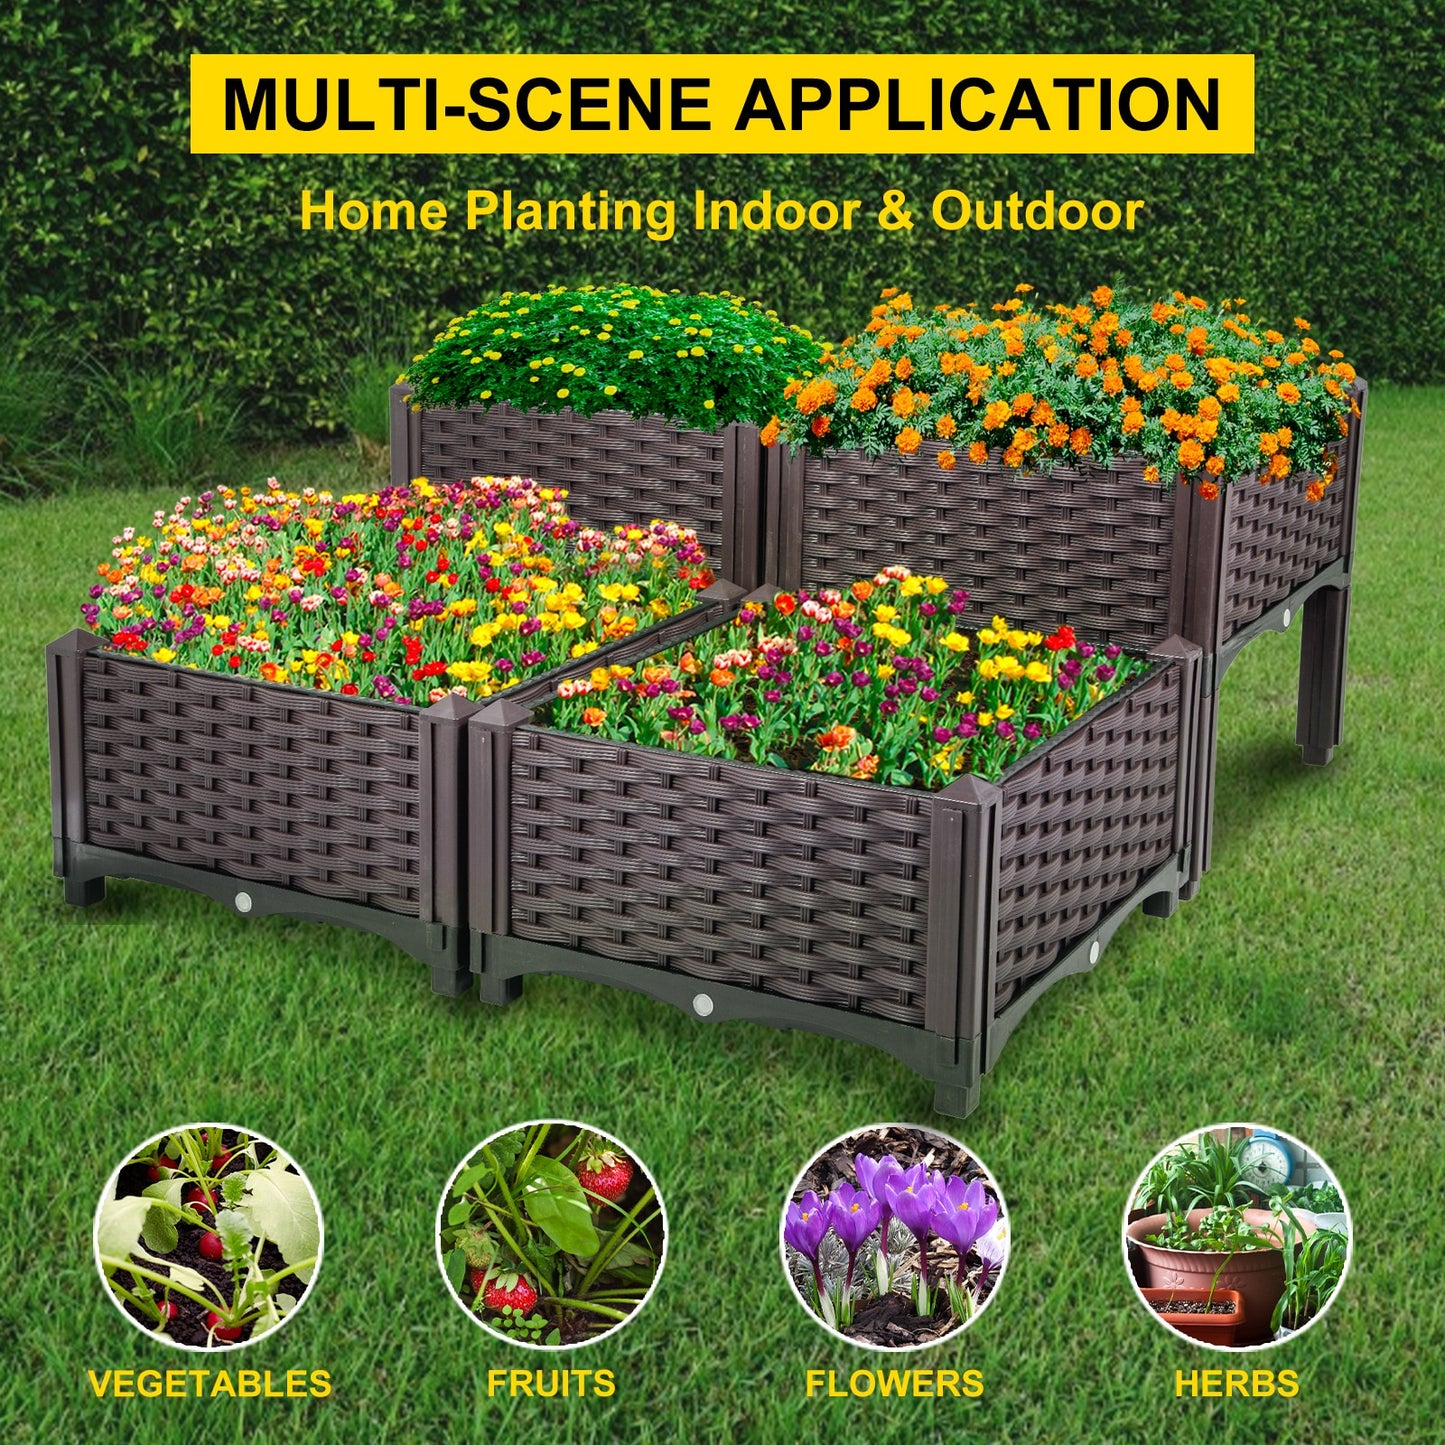 Raised Garden Bed 15.7 in Flower Box Kit, Brown Rattan Style Plastic Planter Grow Care Box